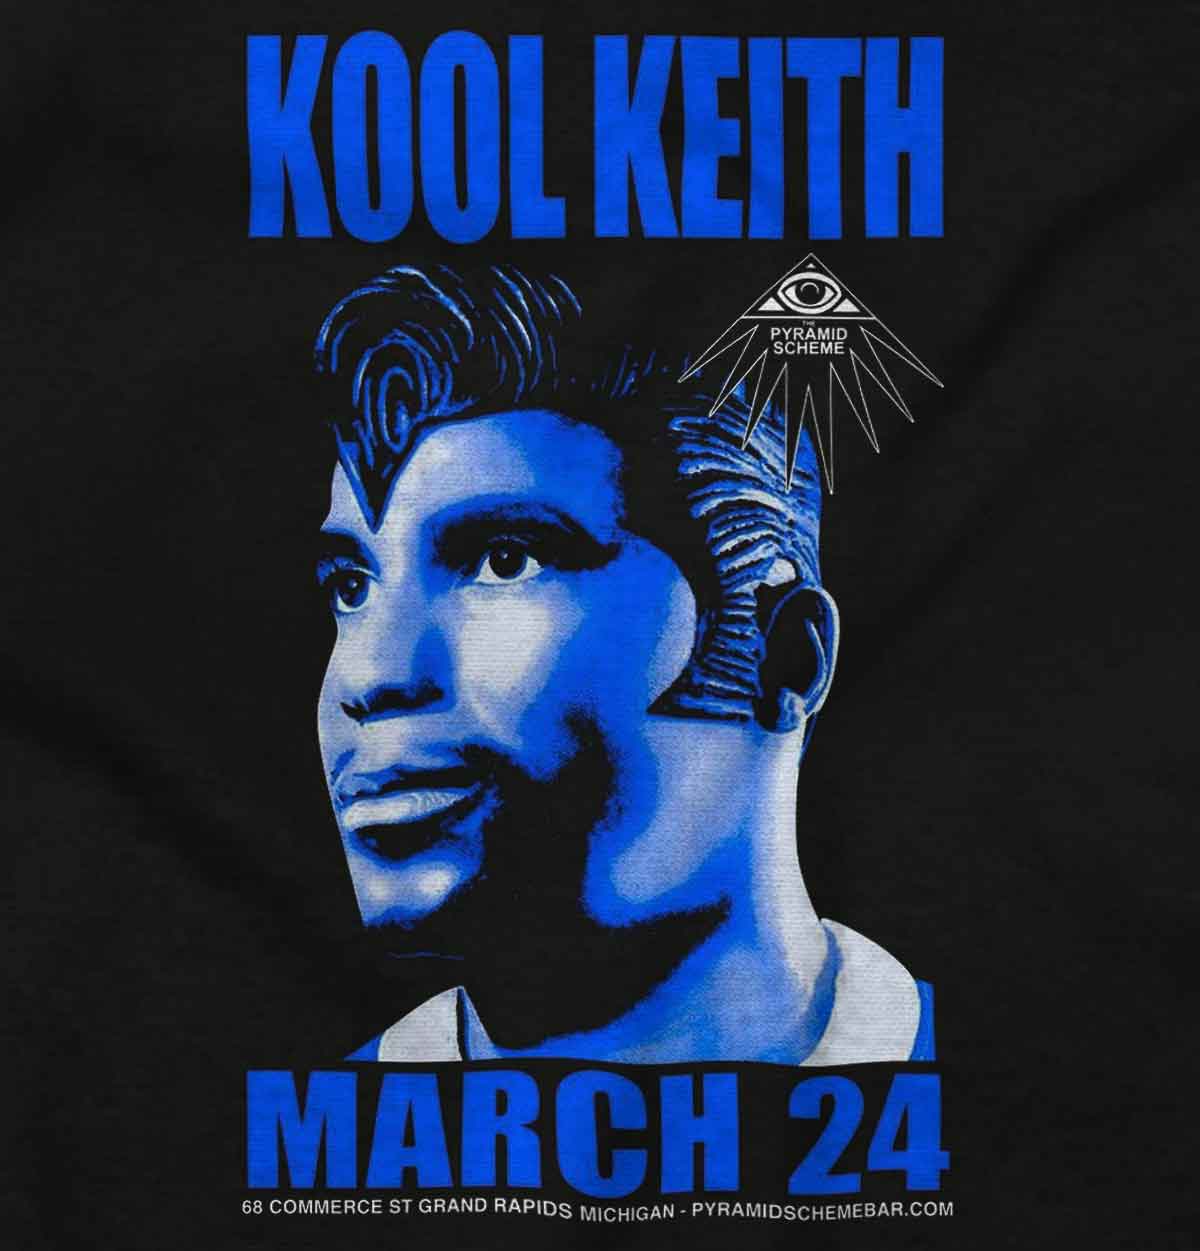 Kool Keith is seen wearing a black Elvis headpiece, symbolizing defiance and originality in fashion, capturing the essence and celebration of Hip Hop's unique style and diverse influences.